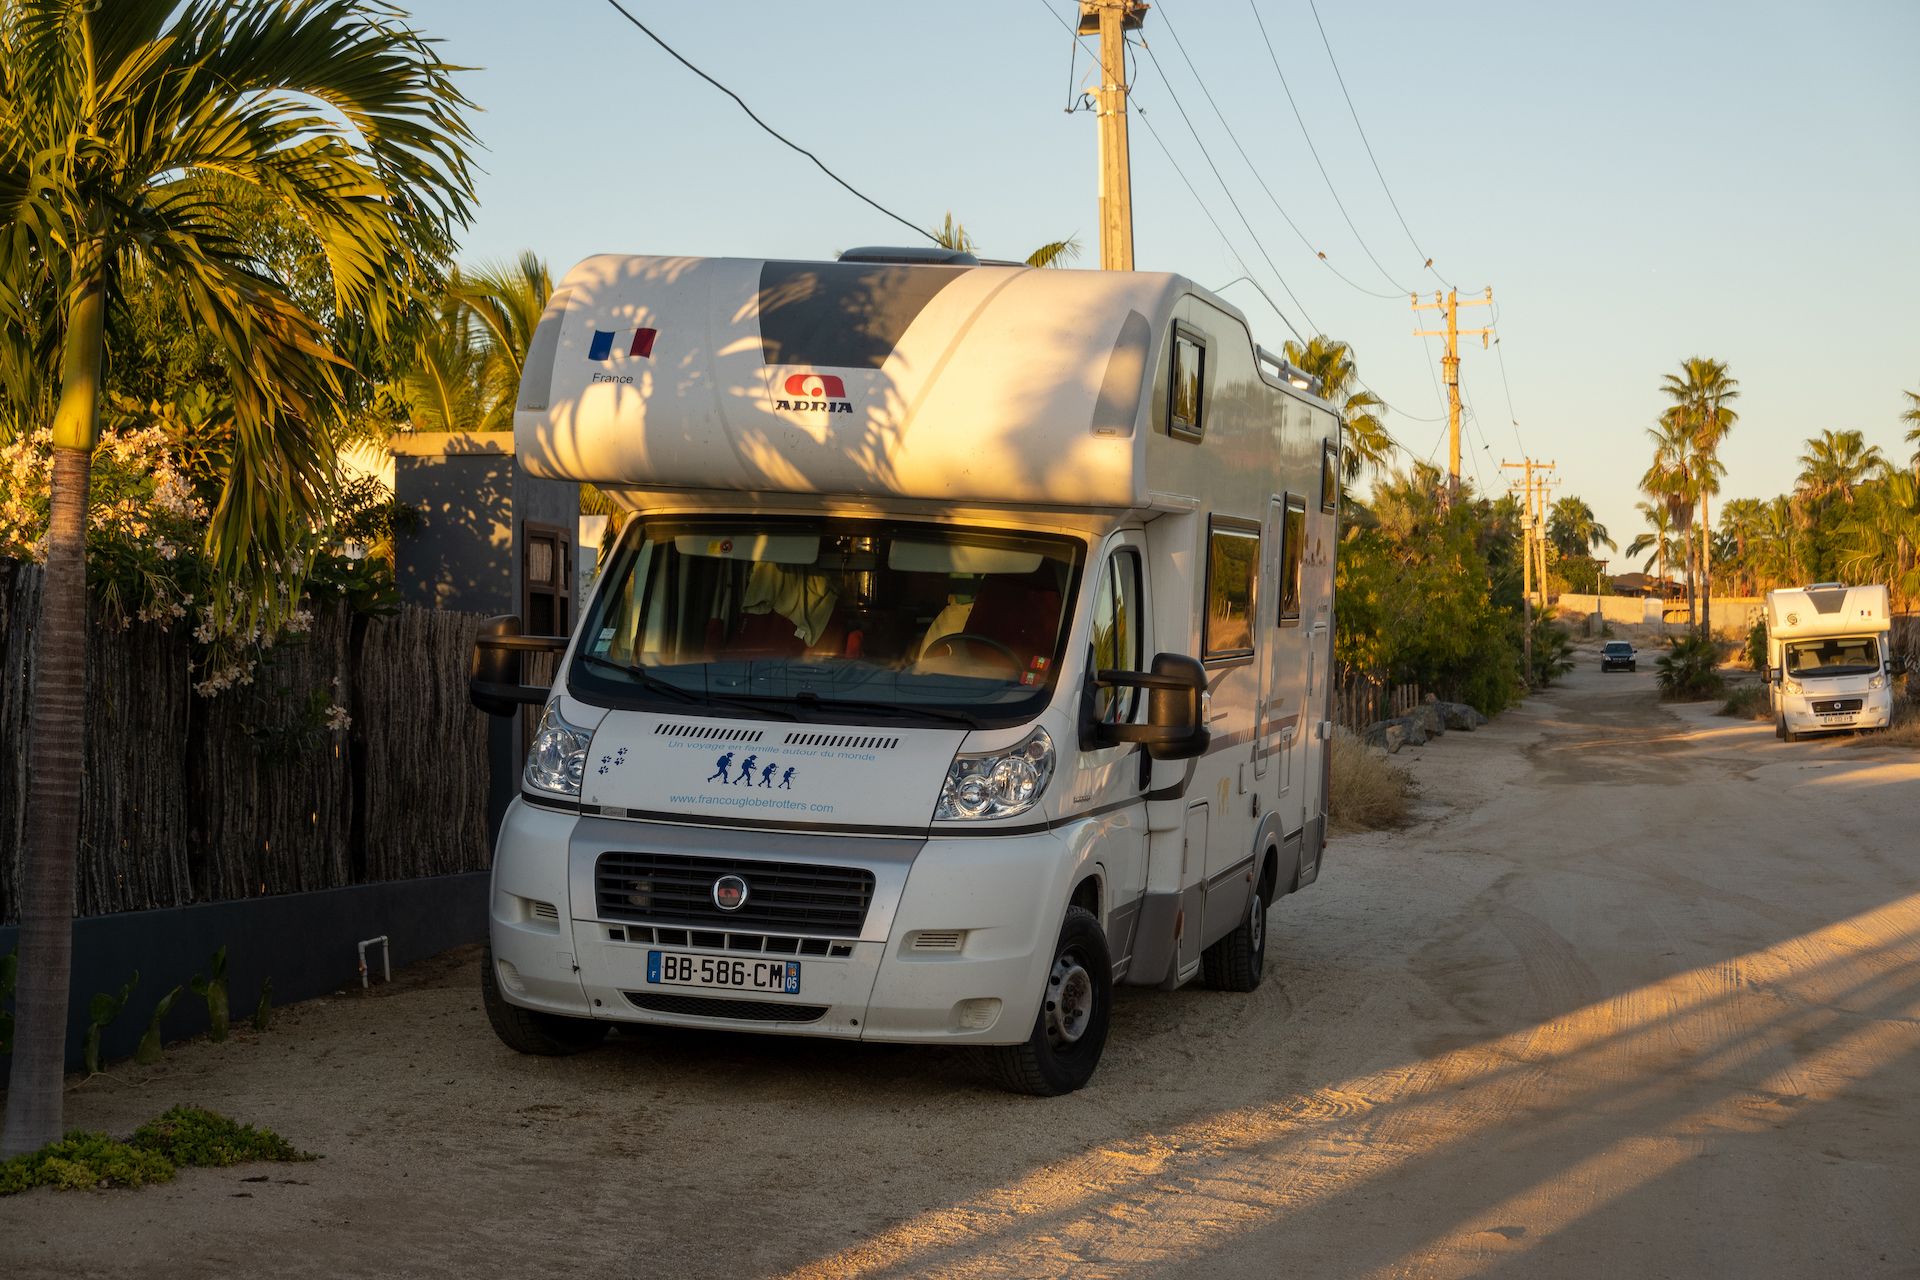 RVs with French license plates in Todos Santos